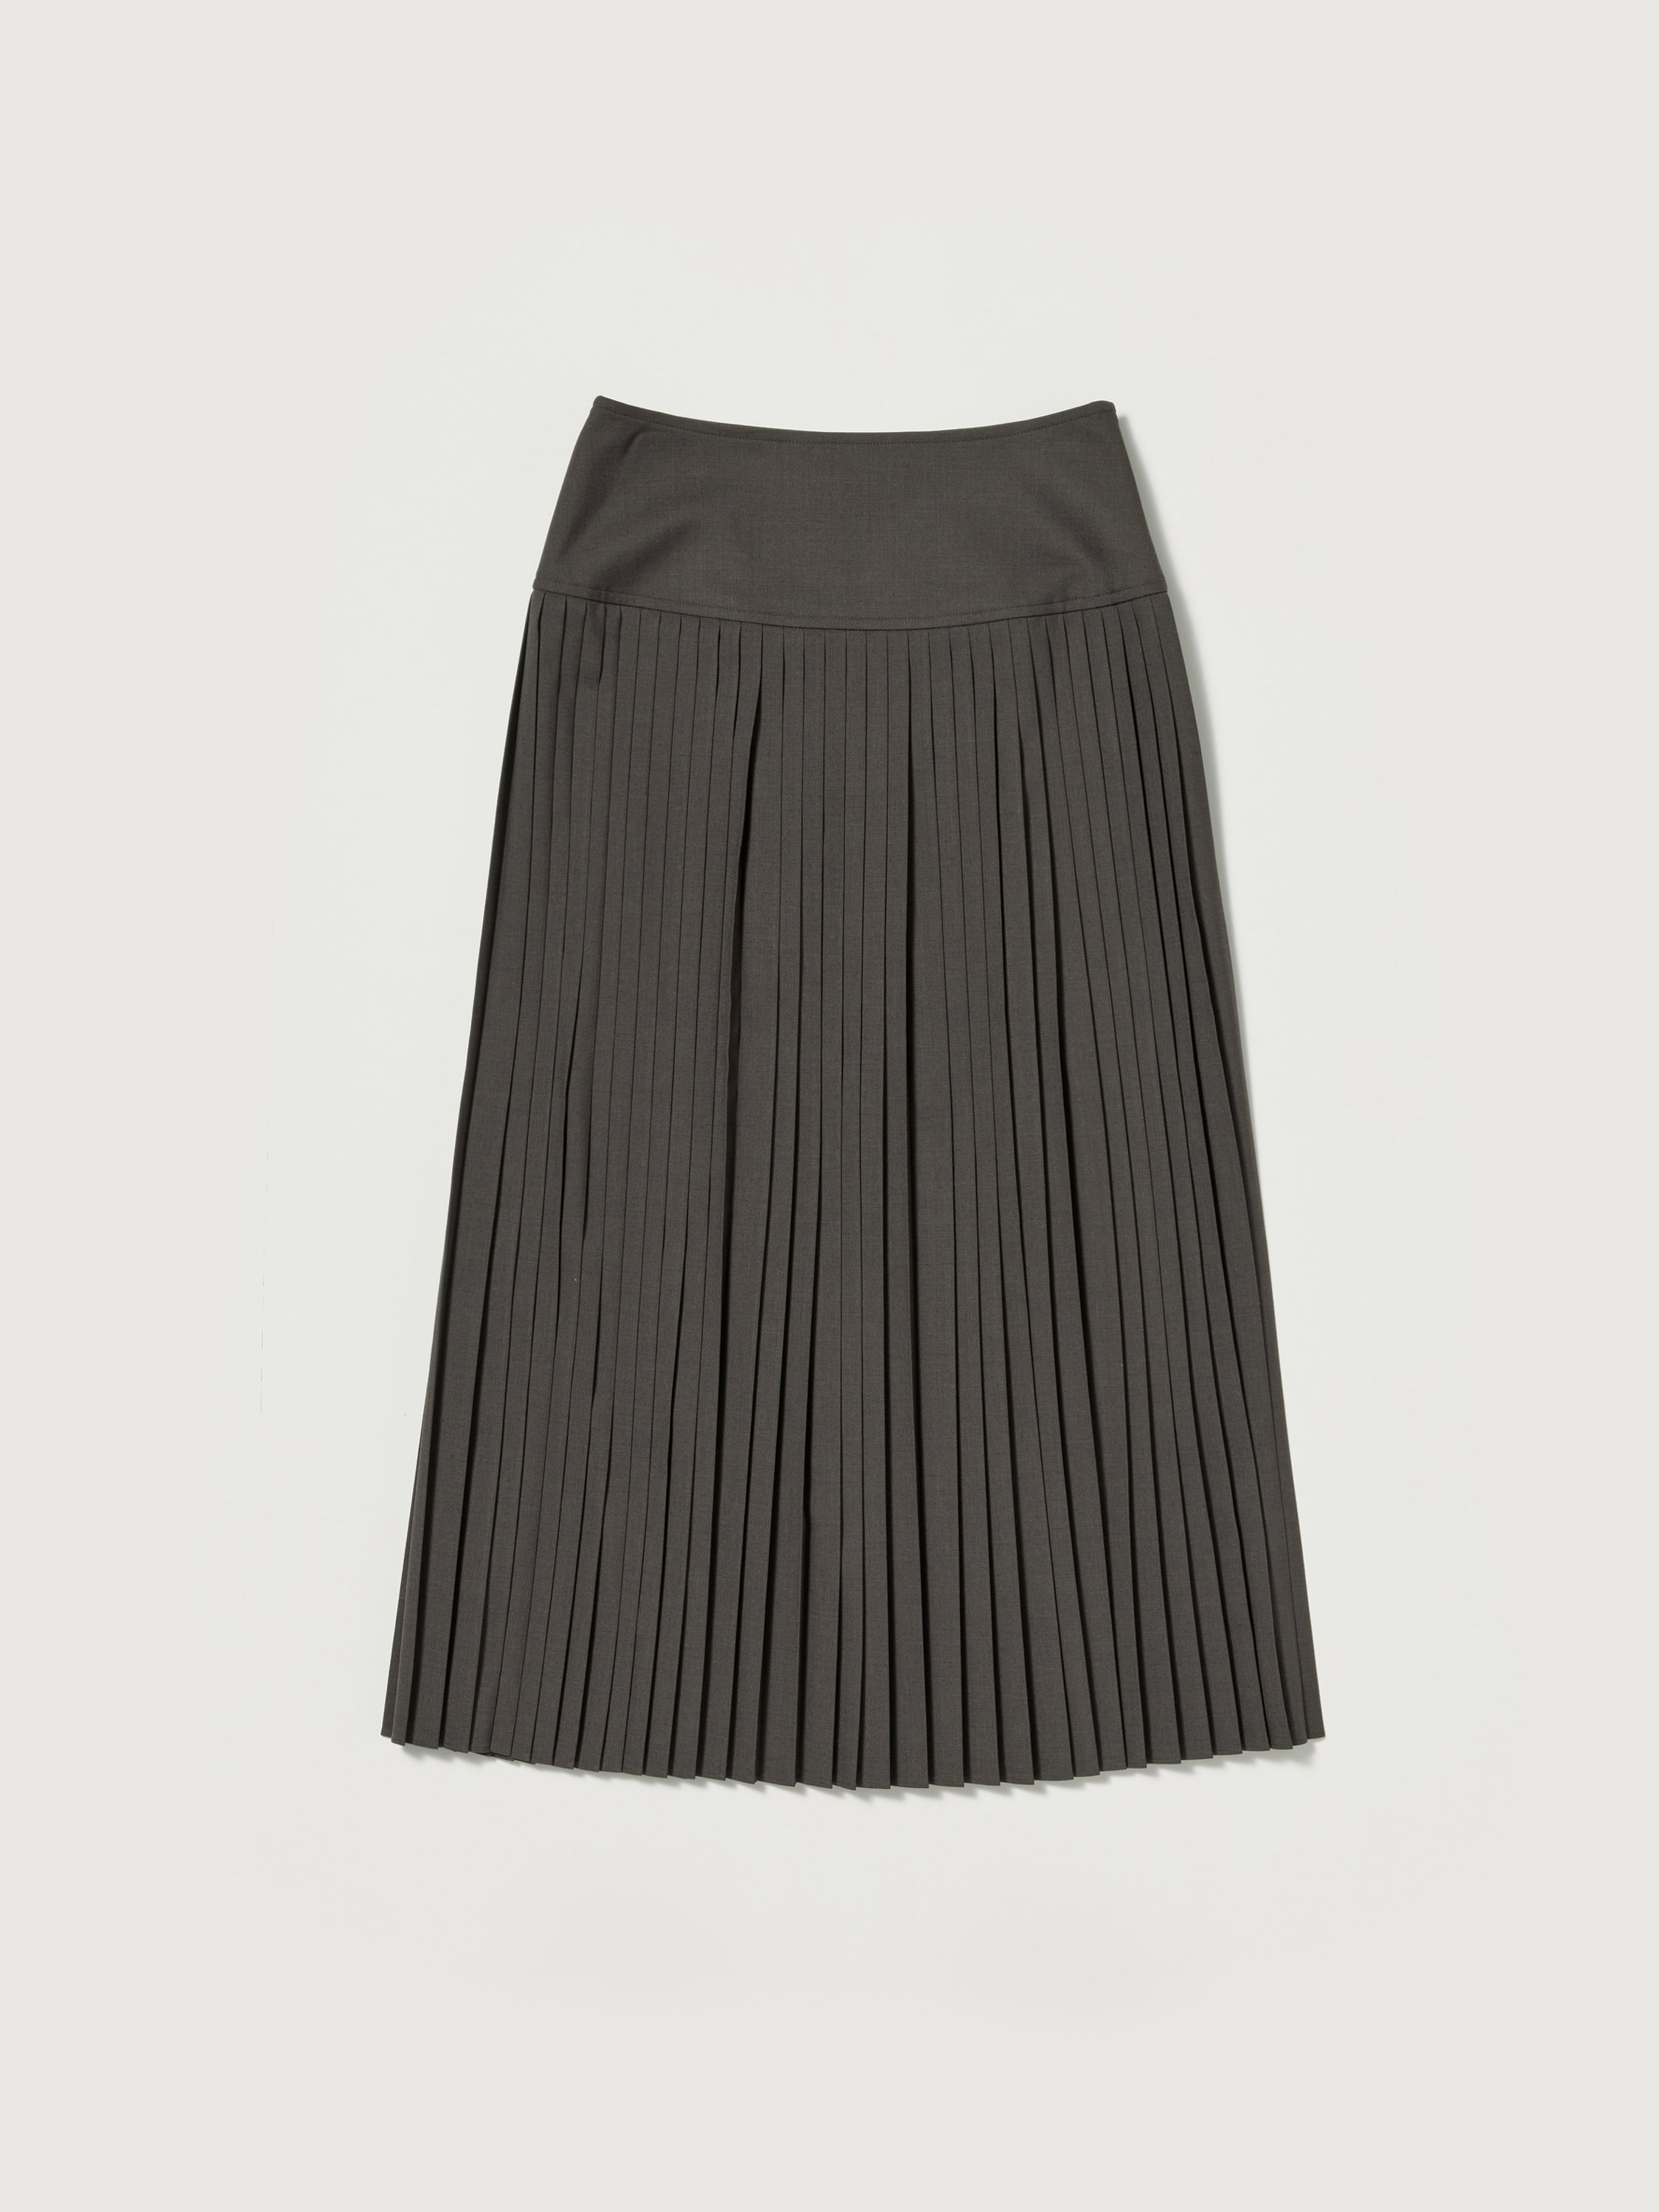 SUPER FINE TROPICAL WOOL PLEATED SKIRT 詳細画像 TOP BROWN 4